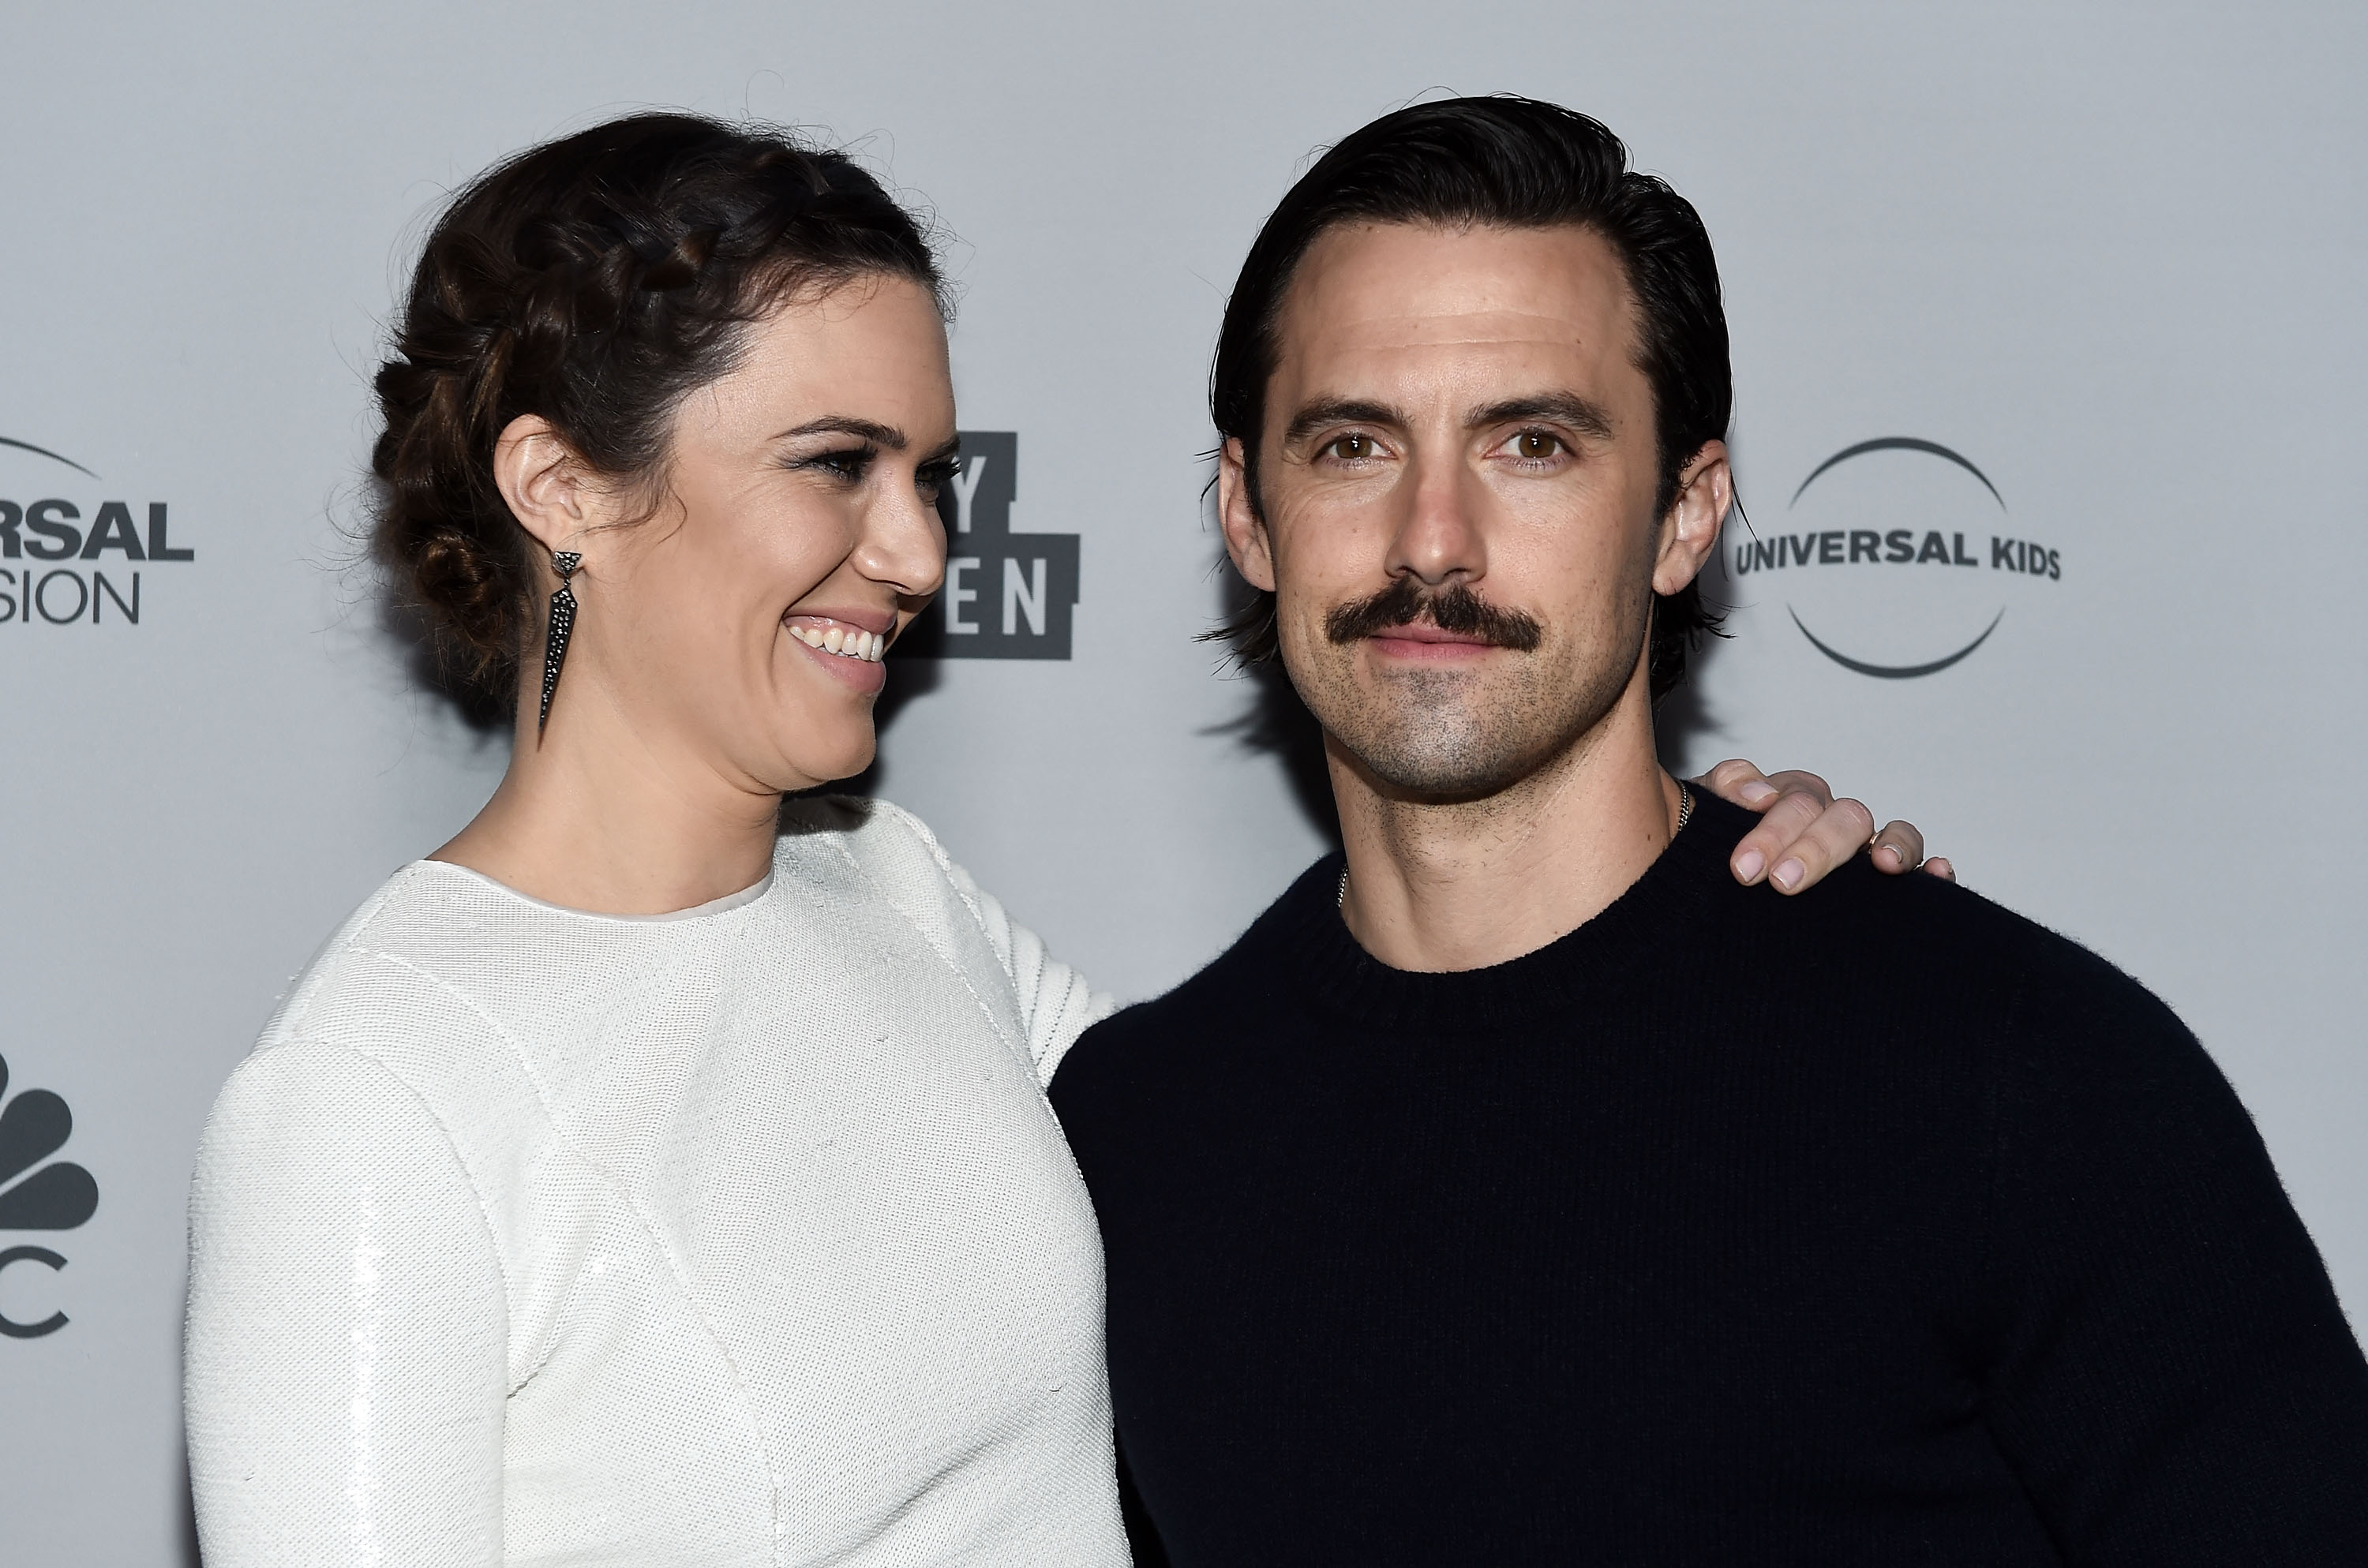 Mandy Moore and Milo Ventimiglia pose for pictures together. Moore wears a white dress. Venitmiglia wears a black shirt.